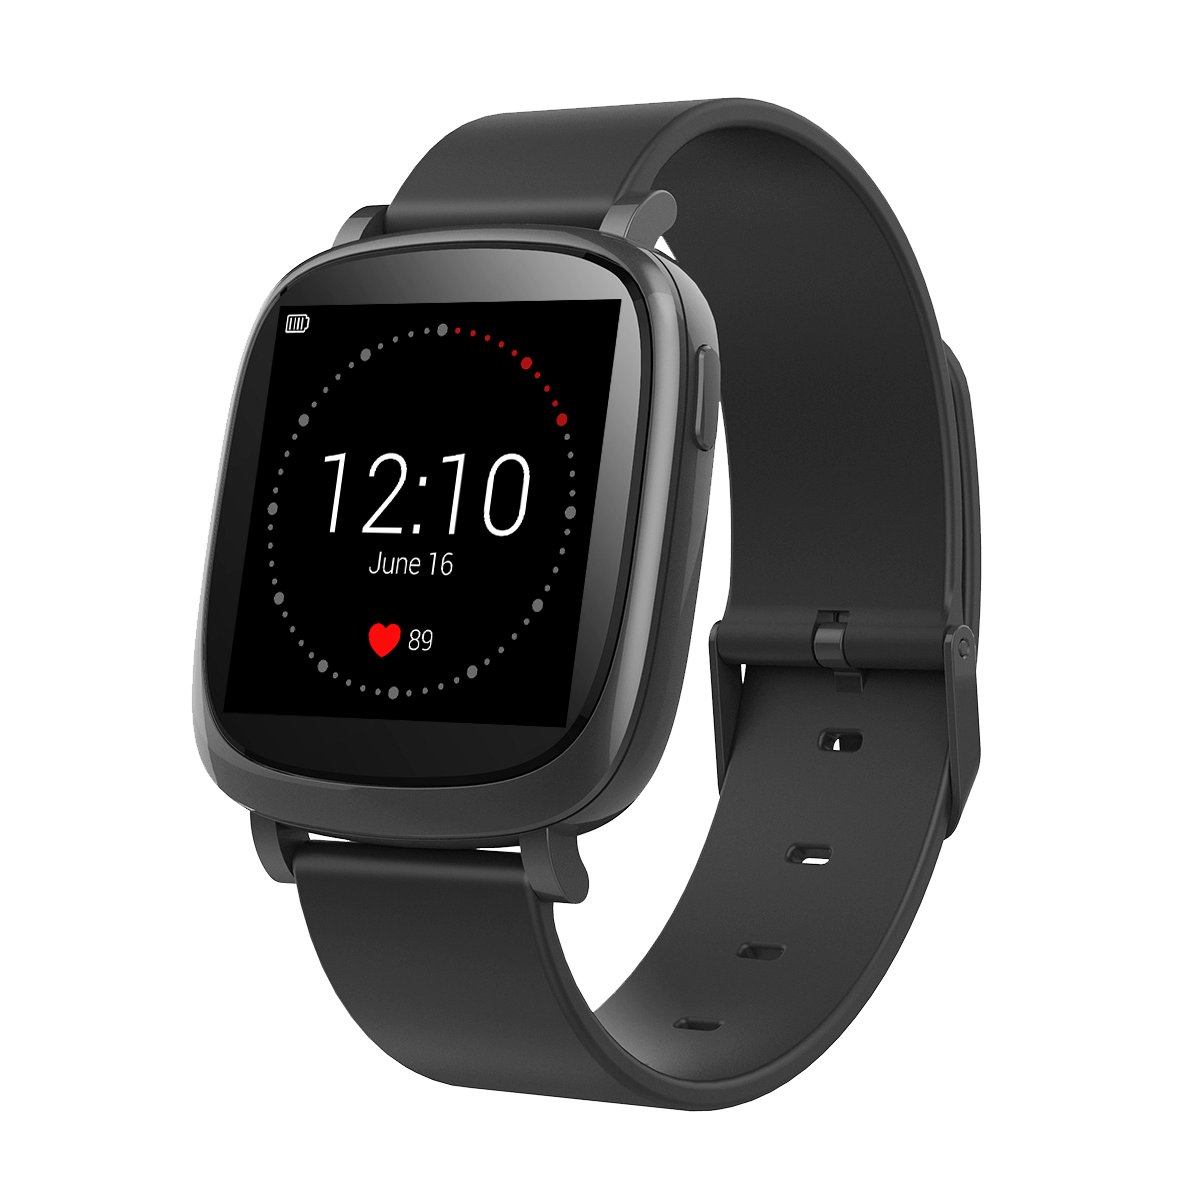 smart watches that track calories burned